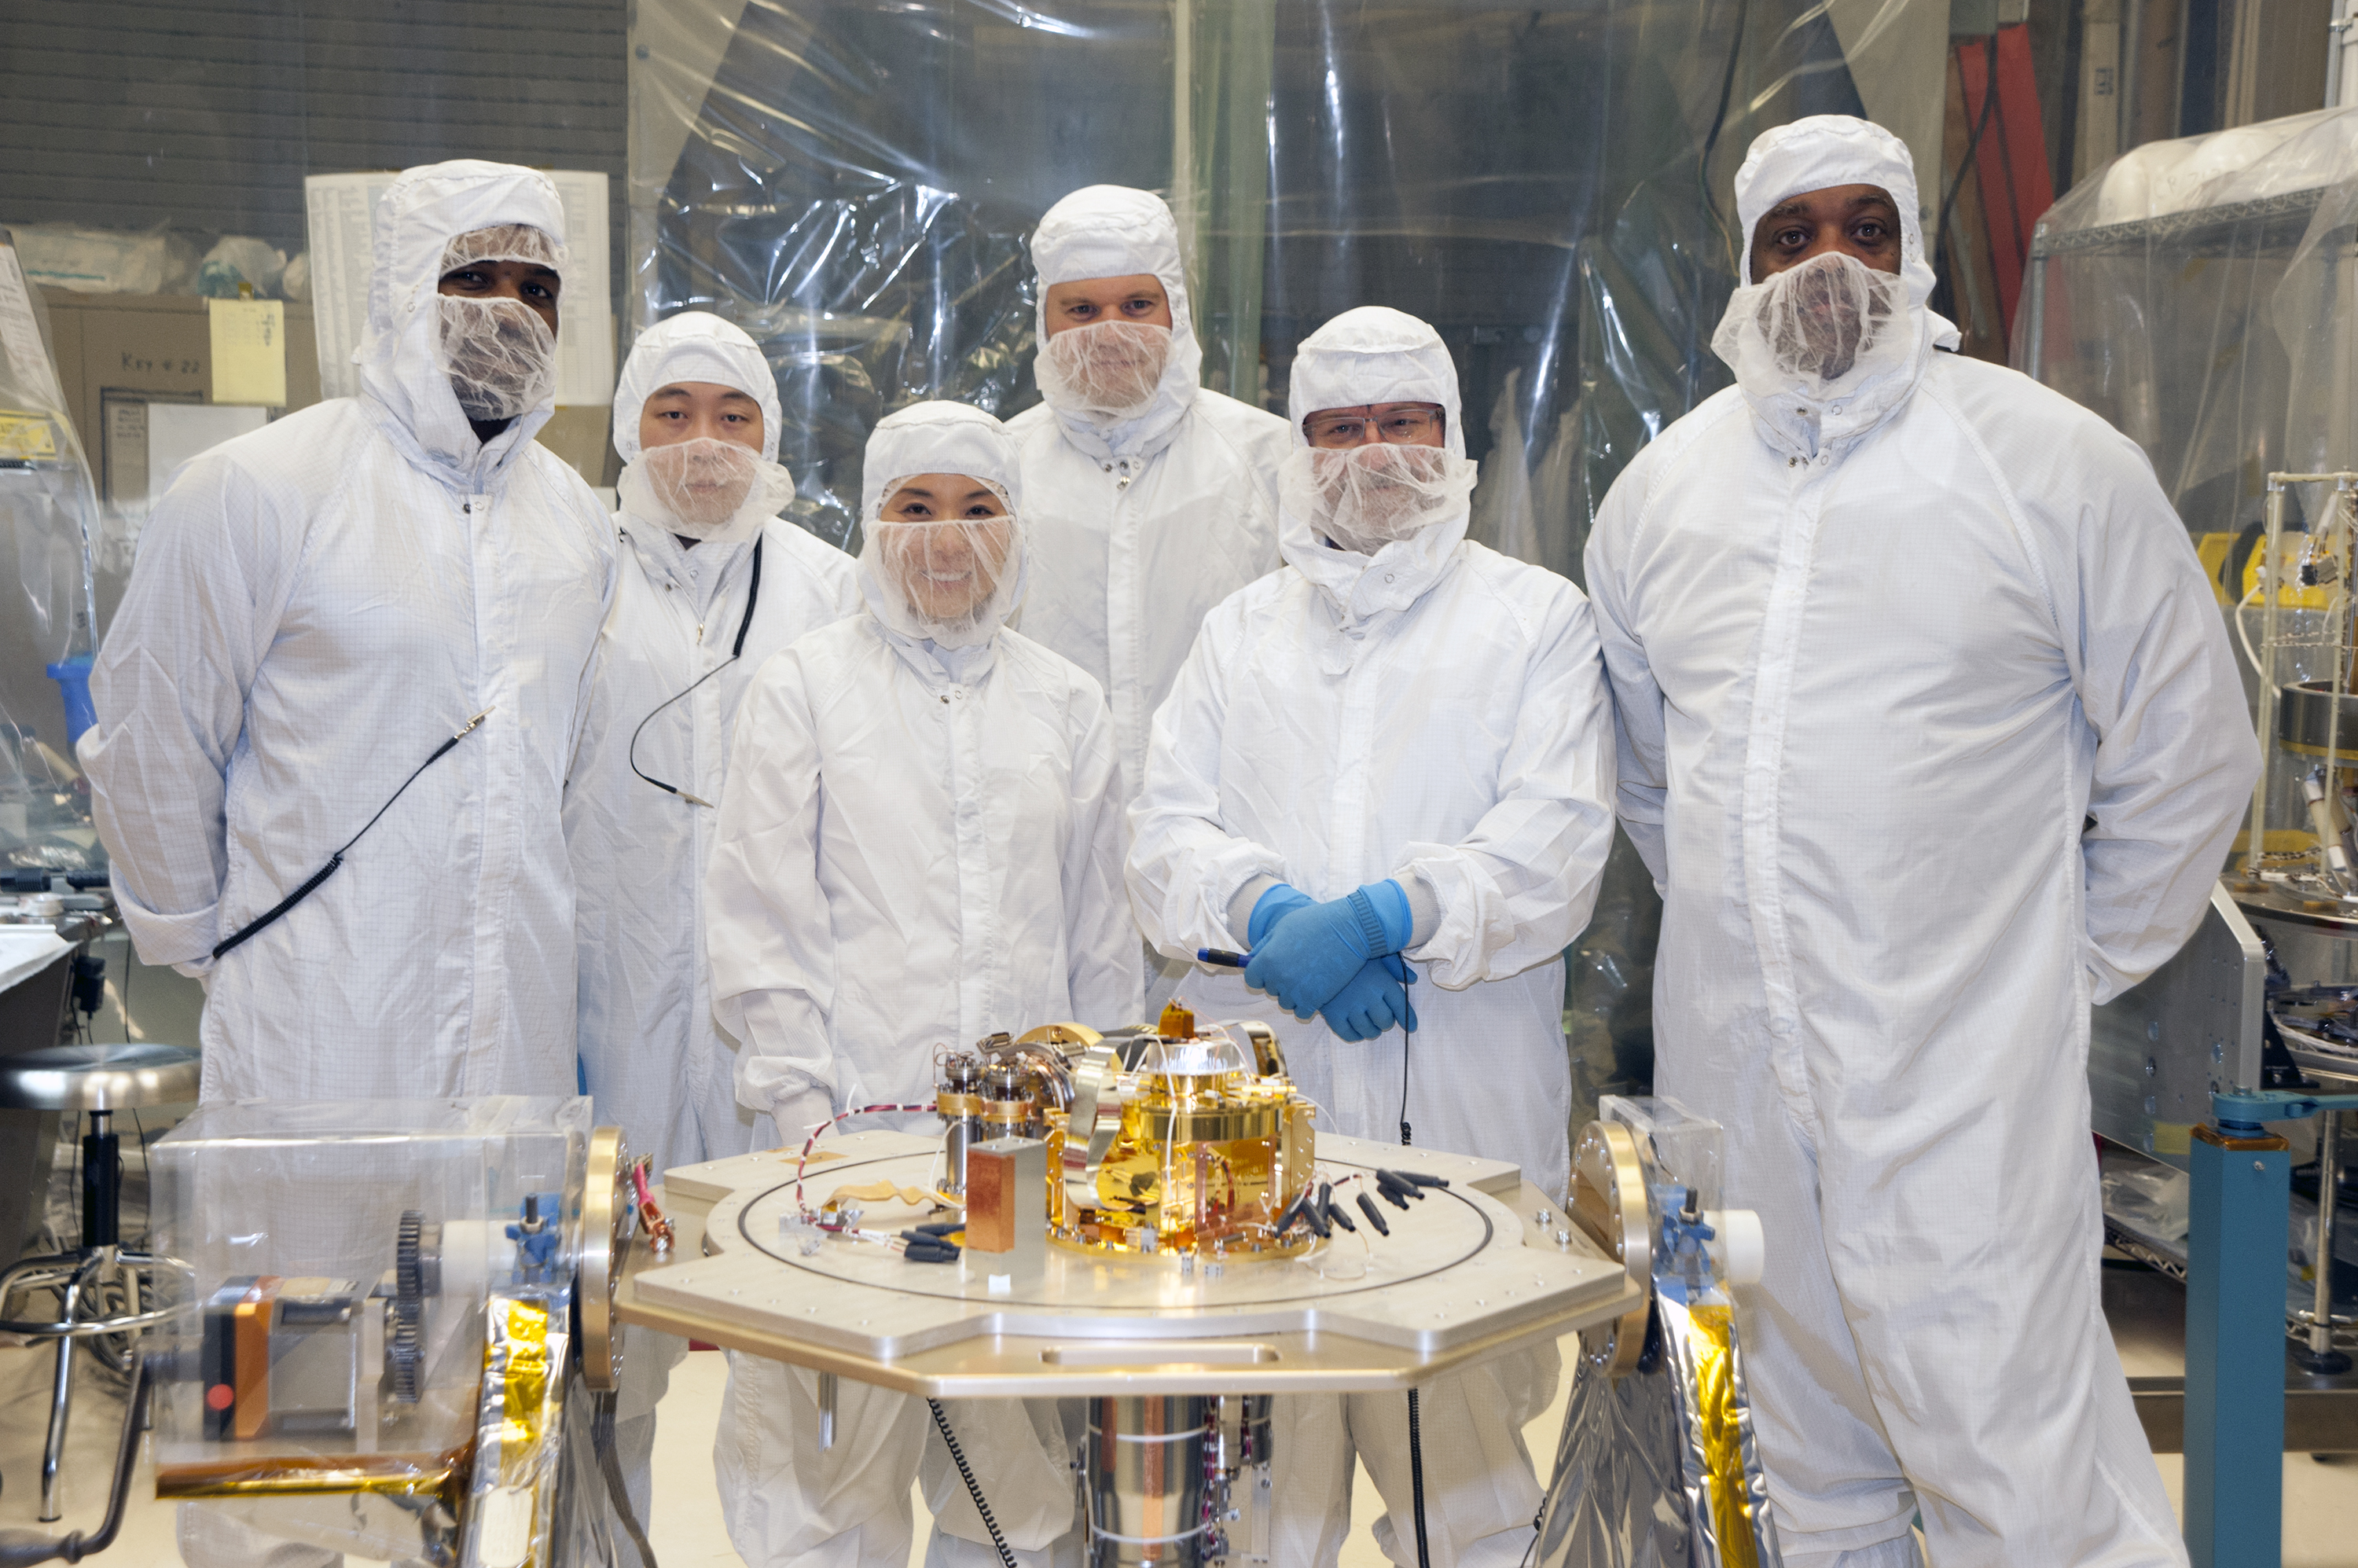 XRISM team members pose with the XRISM Calorimeter Spectrometer Insert in a NASA Goddard clean room. From left to right, they are Bryan James, Mike Sampson, Tomomi Watanabe, Pete Barfknecht, Scott Porter, and Sinclair Douglas.Credit: Larry Gilbert/NASA